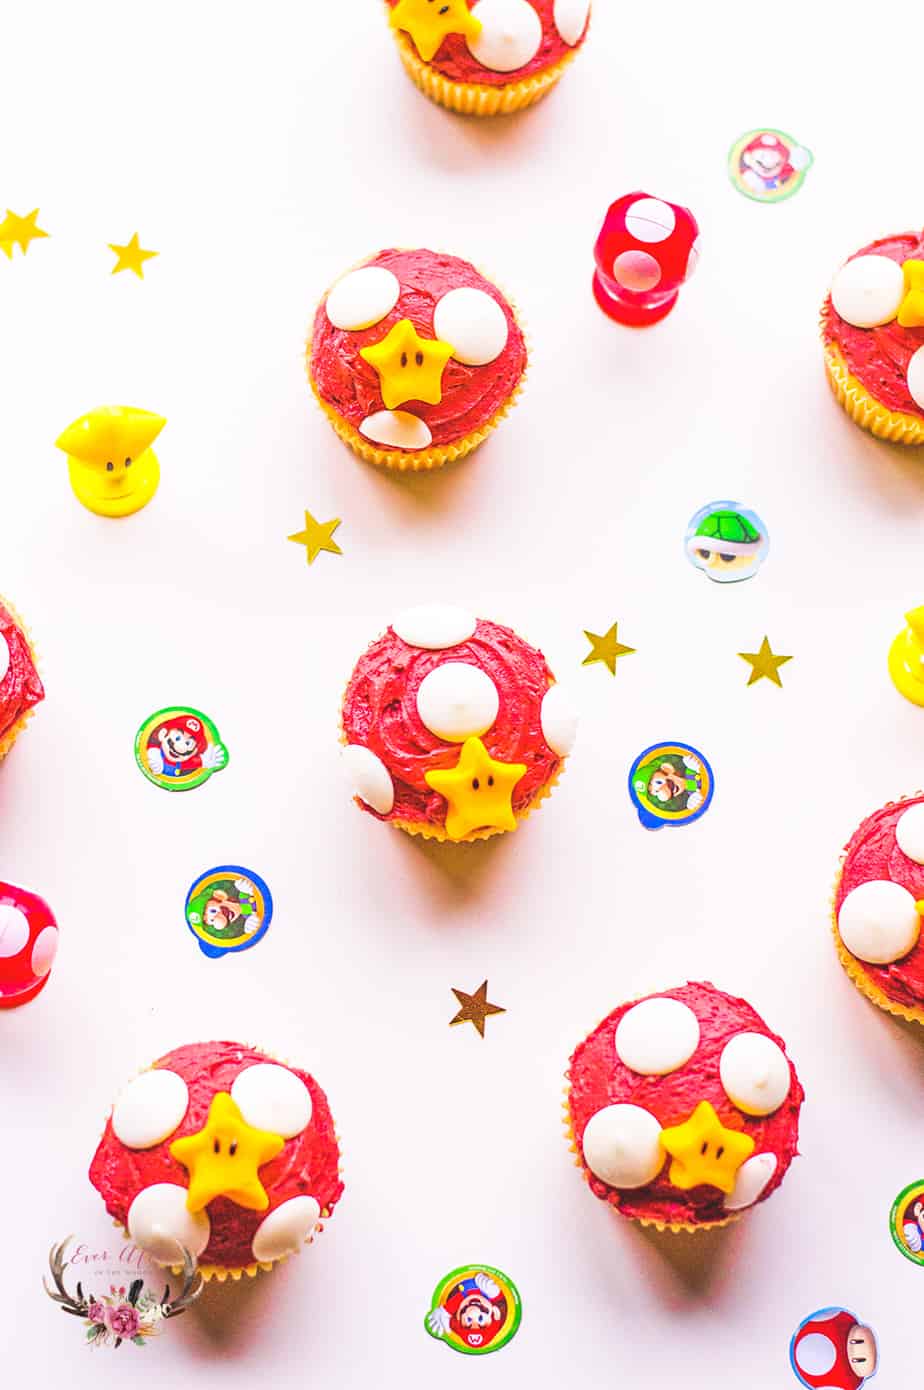 Super Mario Bros. Cupcake Ideas for that little boy or girl that is Nintendo obsessed!